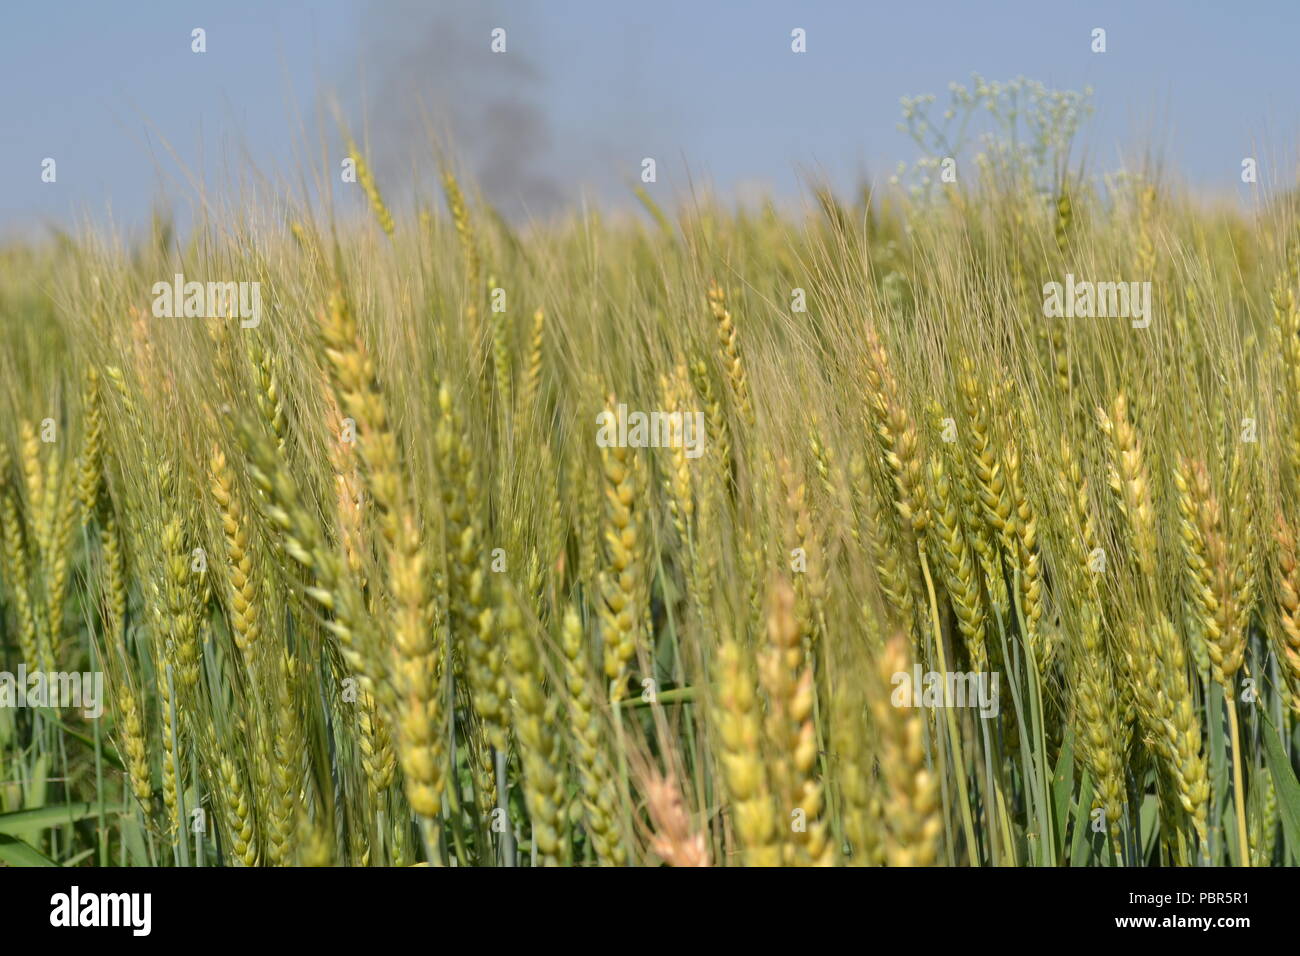 Wheat crops in india Stock Photo